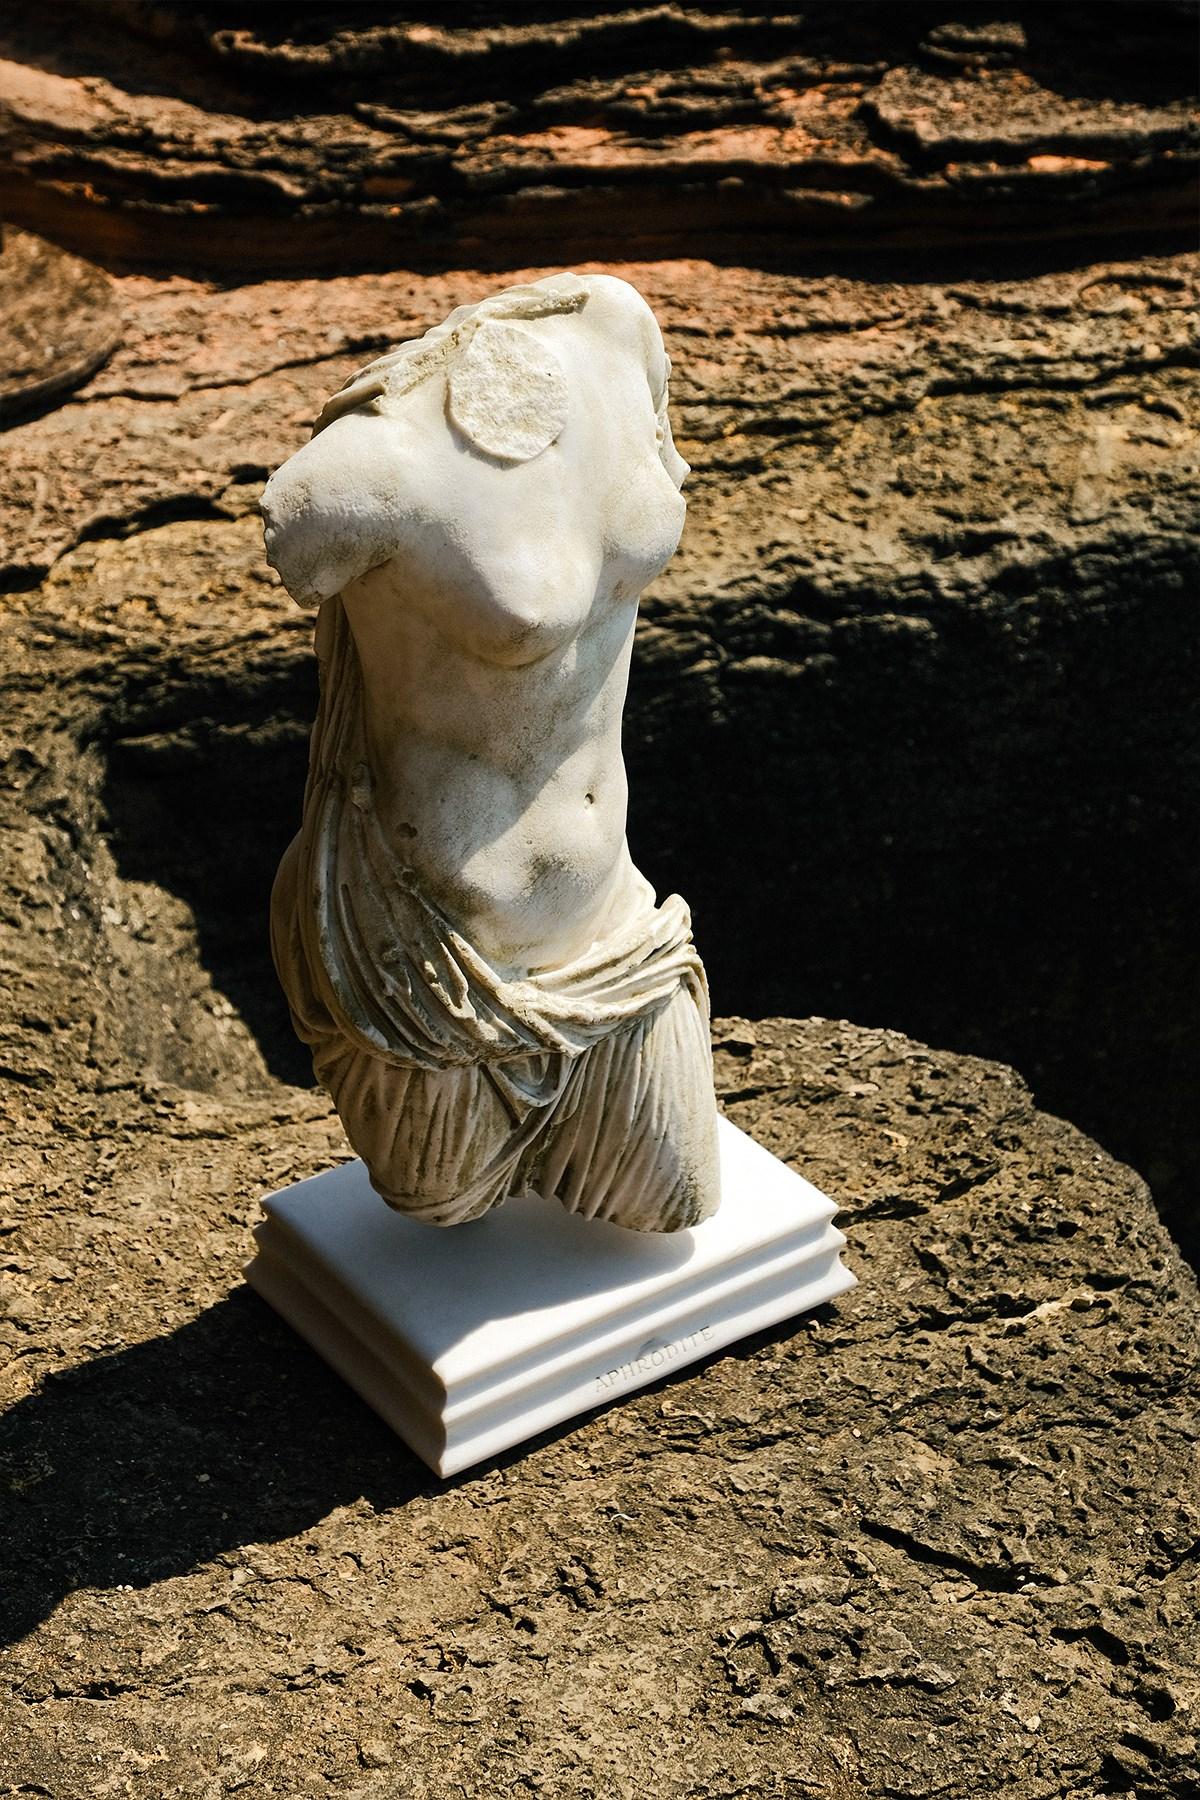 Aphrodite is known as the godess of love and beauty from Greek mythology. In Roman mythology she is called Venus. The original is displayed in the Ephesus Museum.
 
Height: 31.4'' / Width: 13.8'' / Depth: 10.2''/ Weight: 46 kg

-Produced from